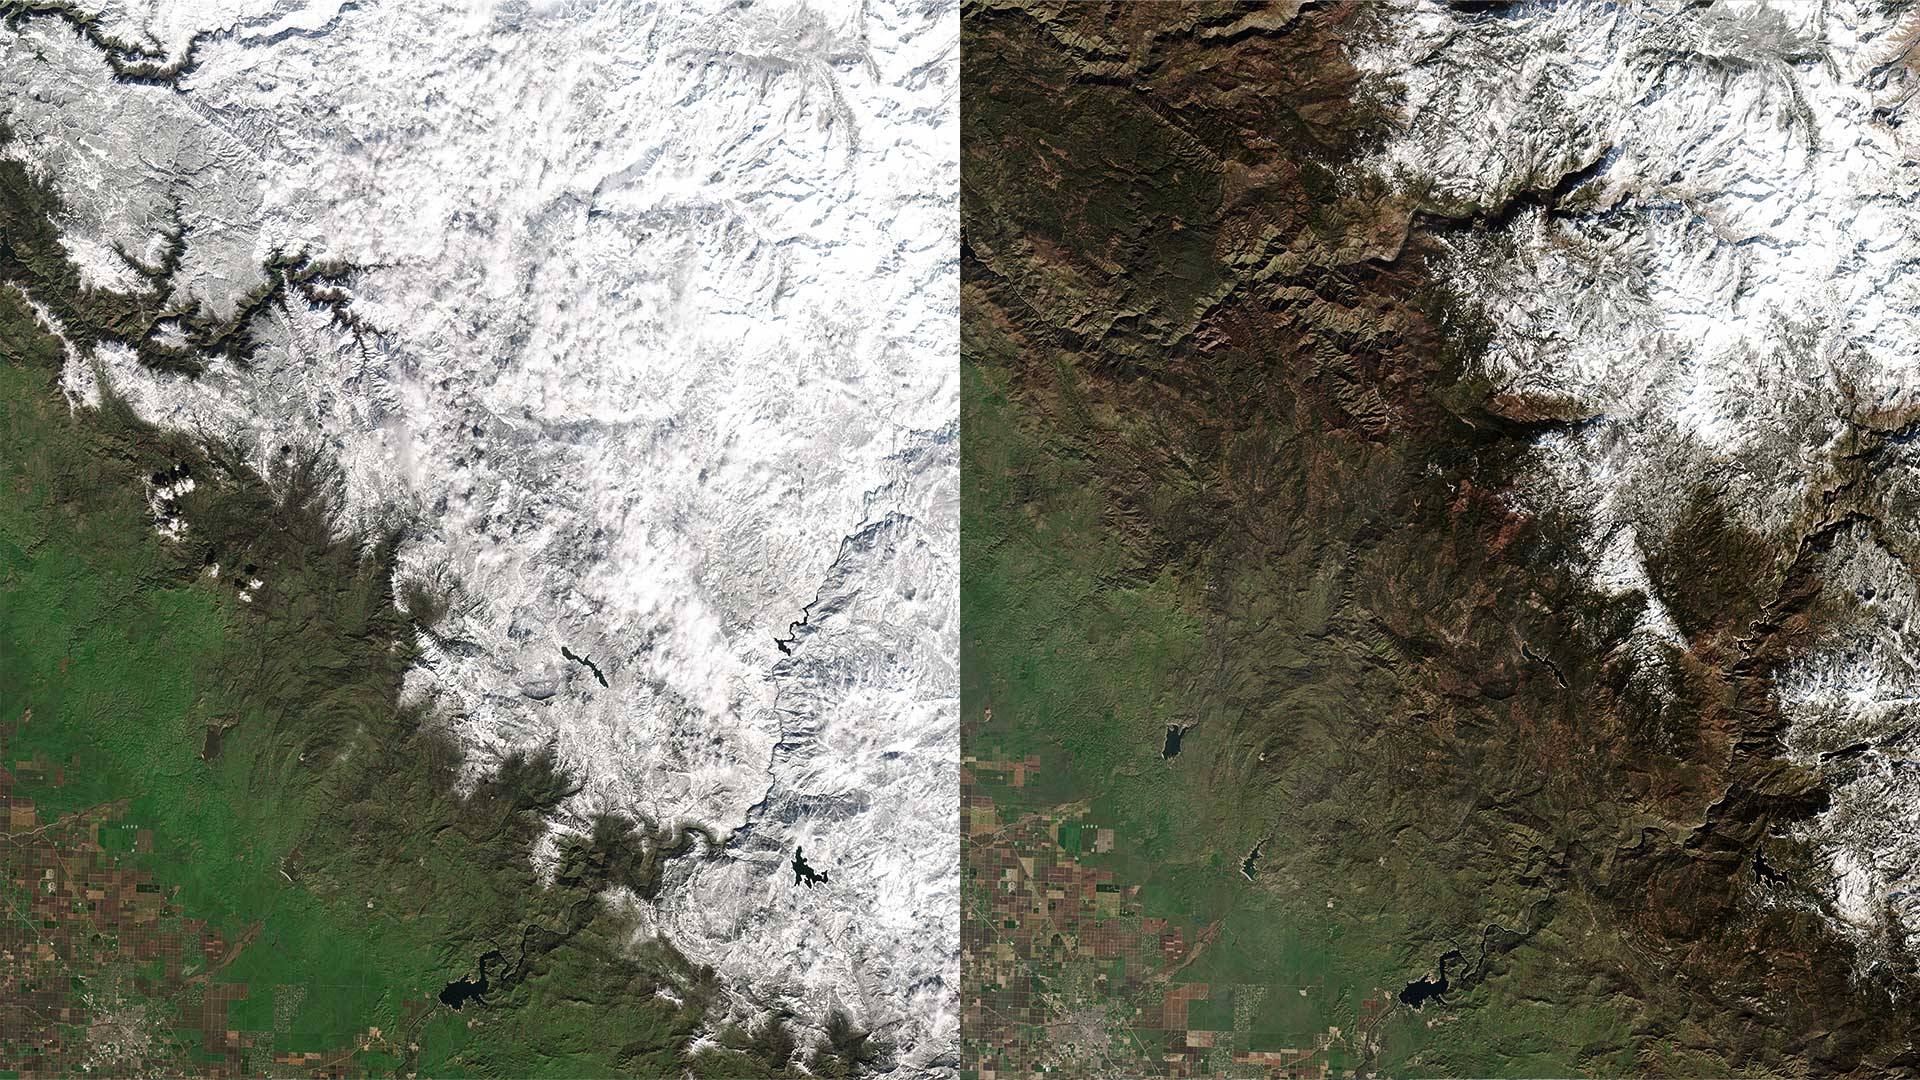 Satellite view of Yosemite Valley. The 'before' image was taken Feb. 6, 2019; the 'after' image on Feb. 1, 2020. Planet